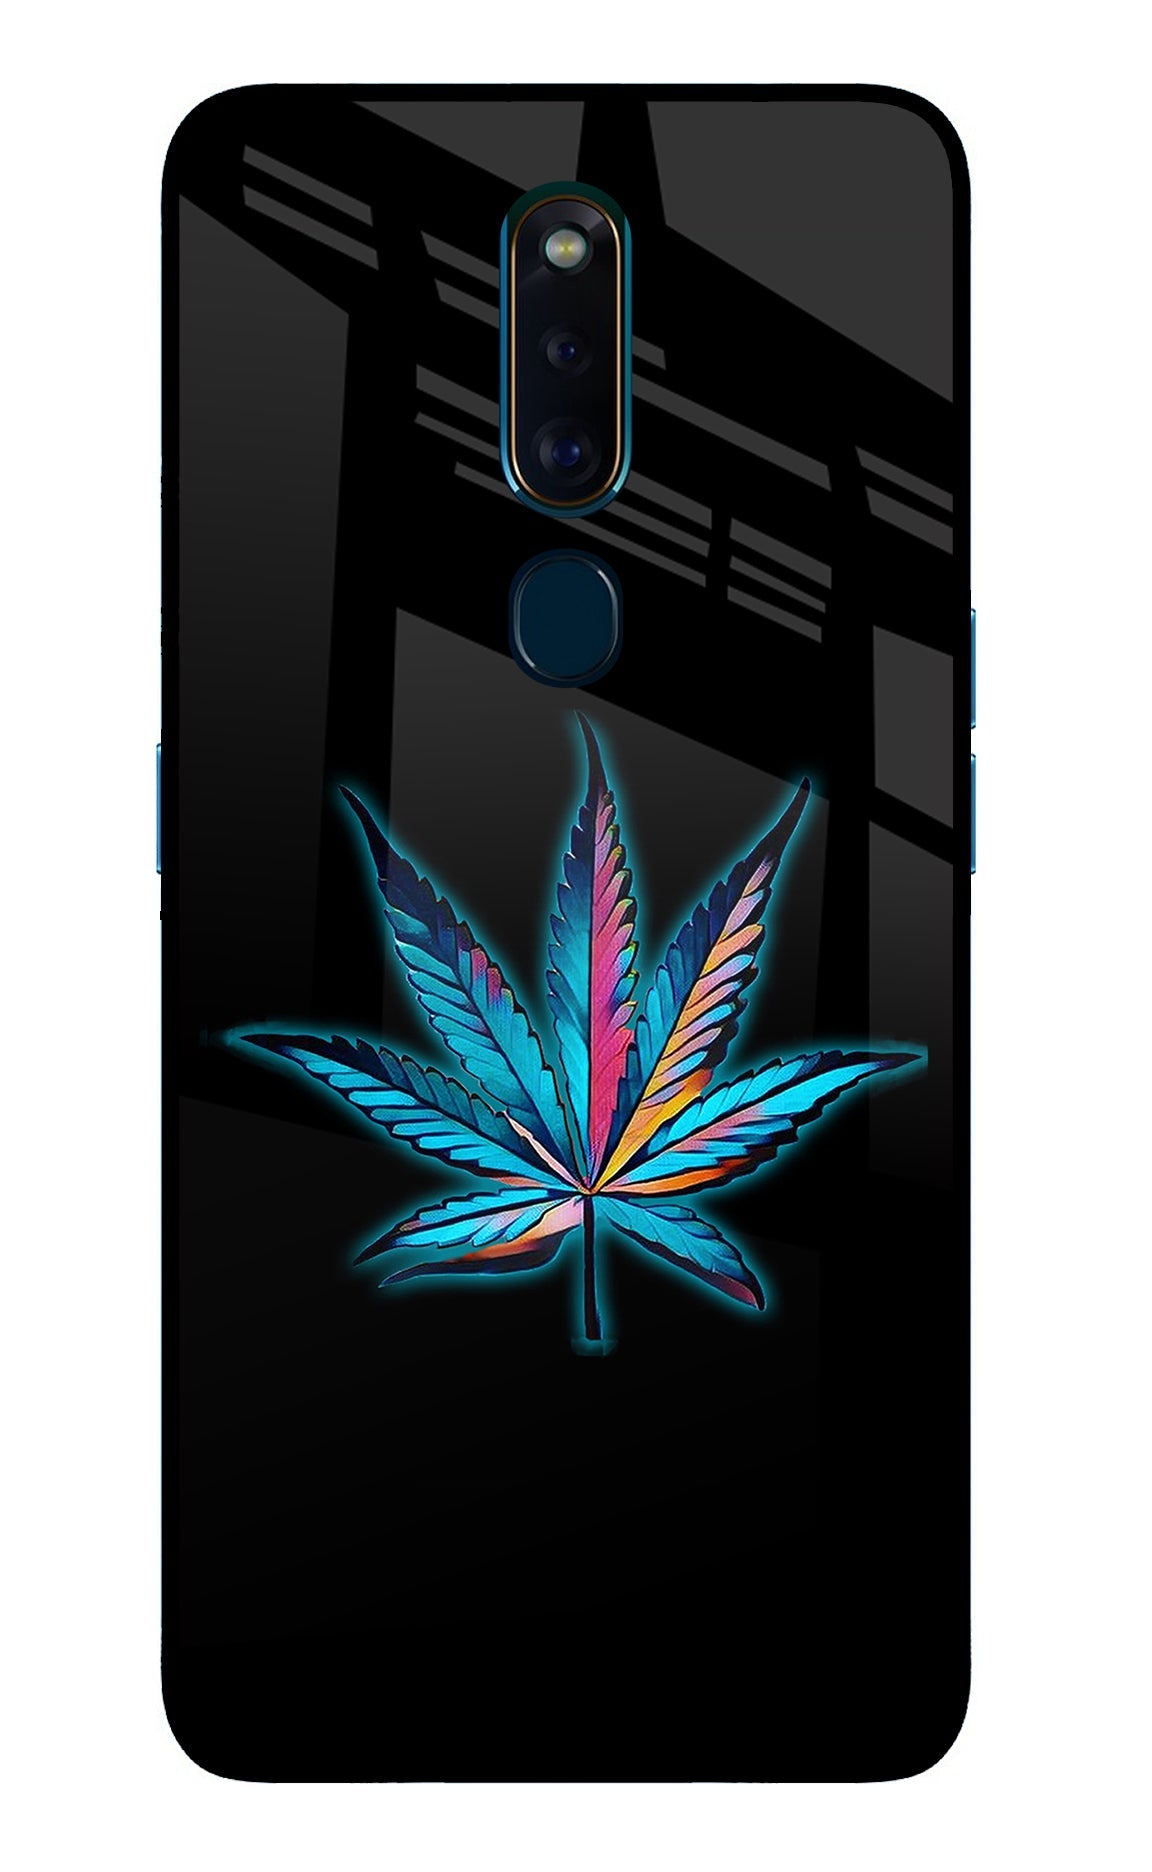 Weed Oppo F11 Pro Glass Case